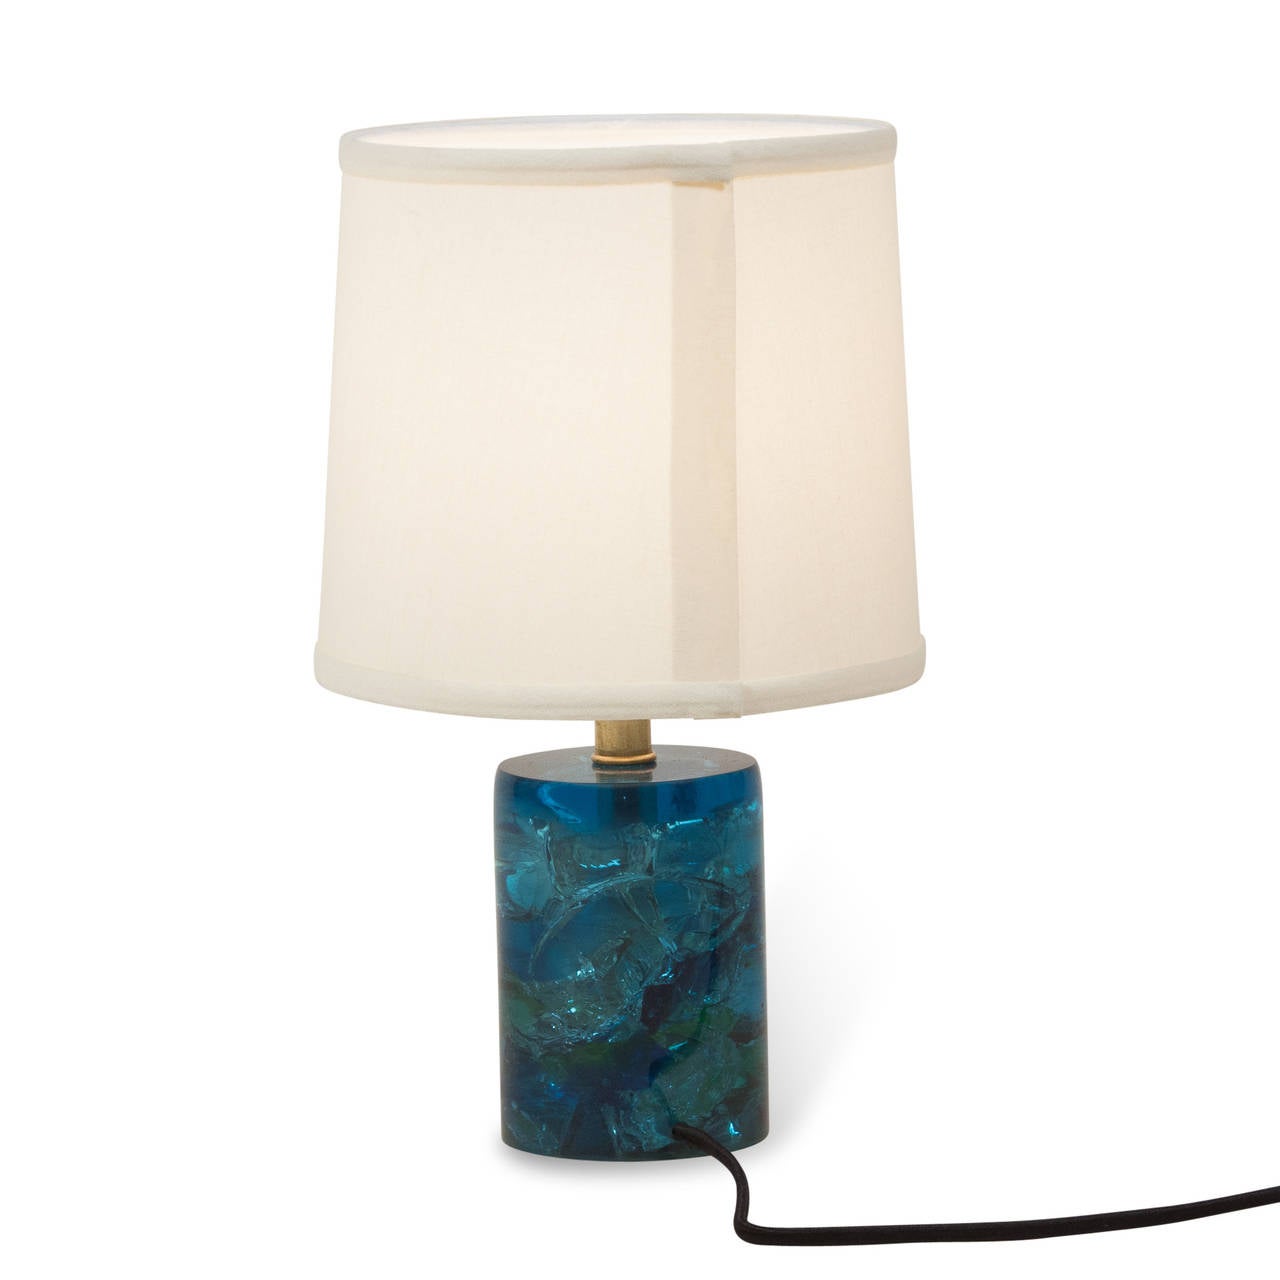 Mid-20th Century Blue Crackle Resin Table Lamp For Sale